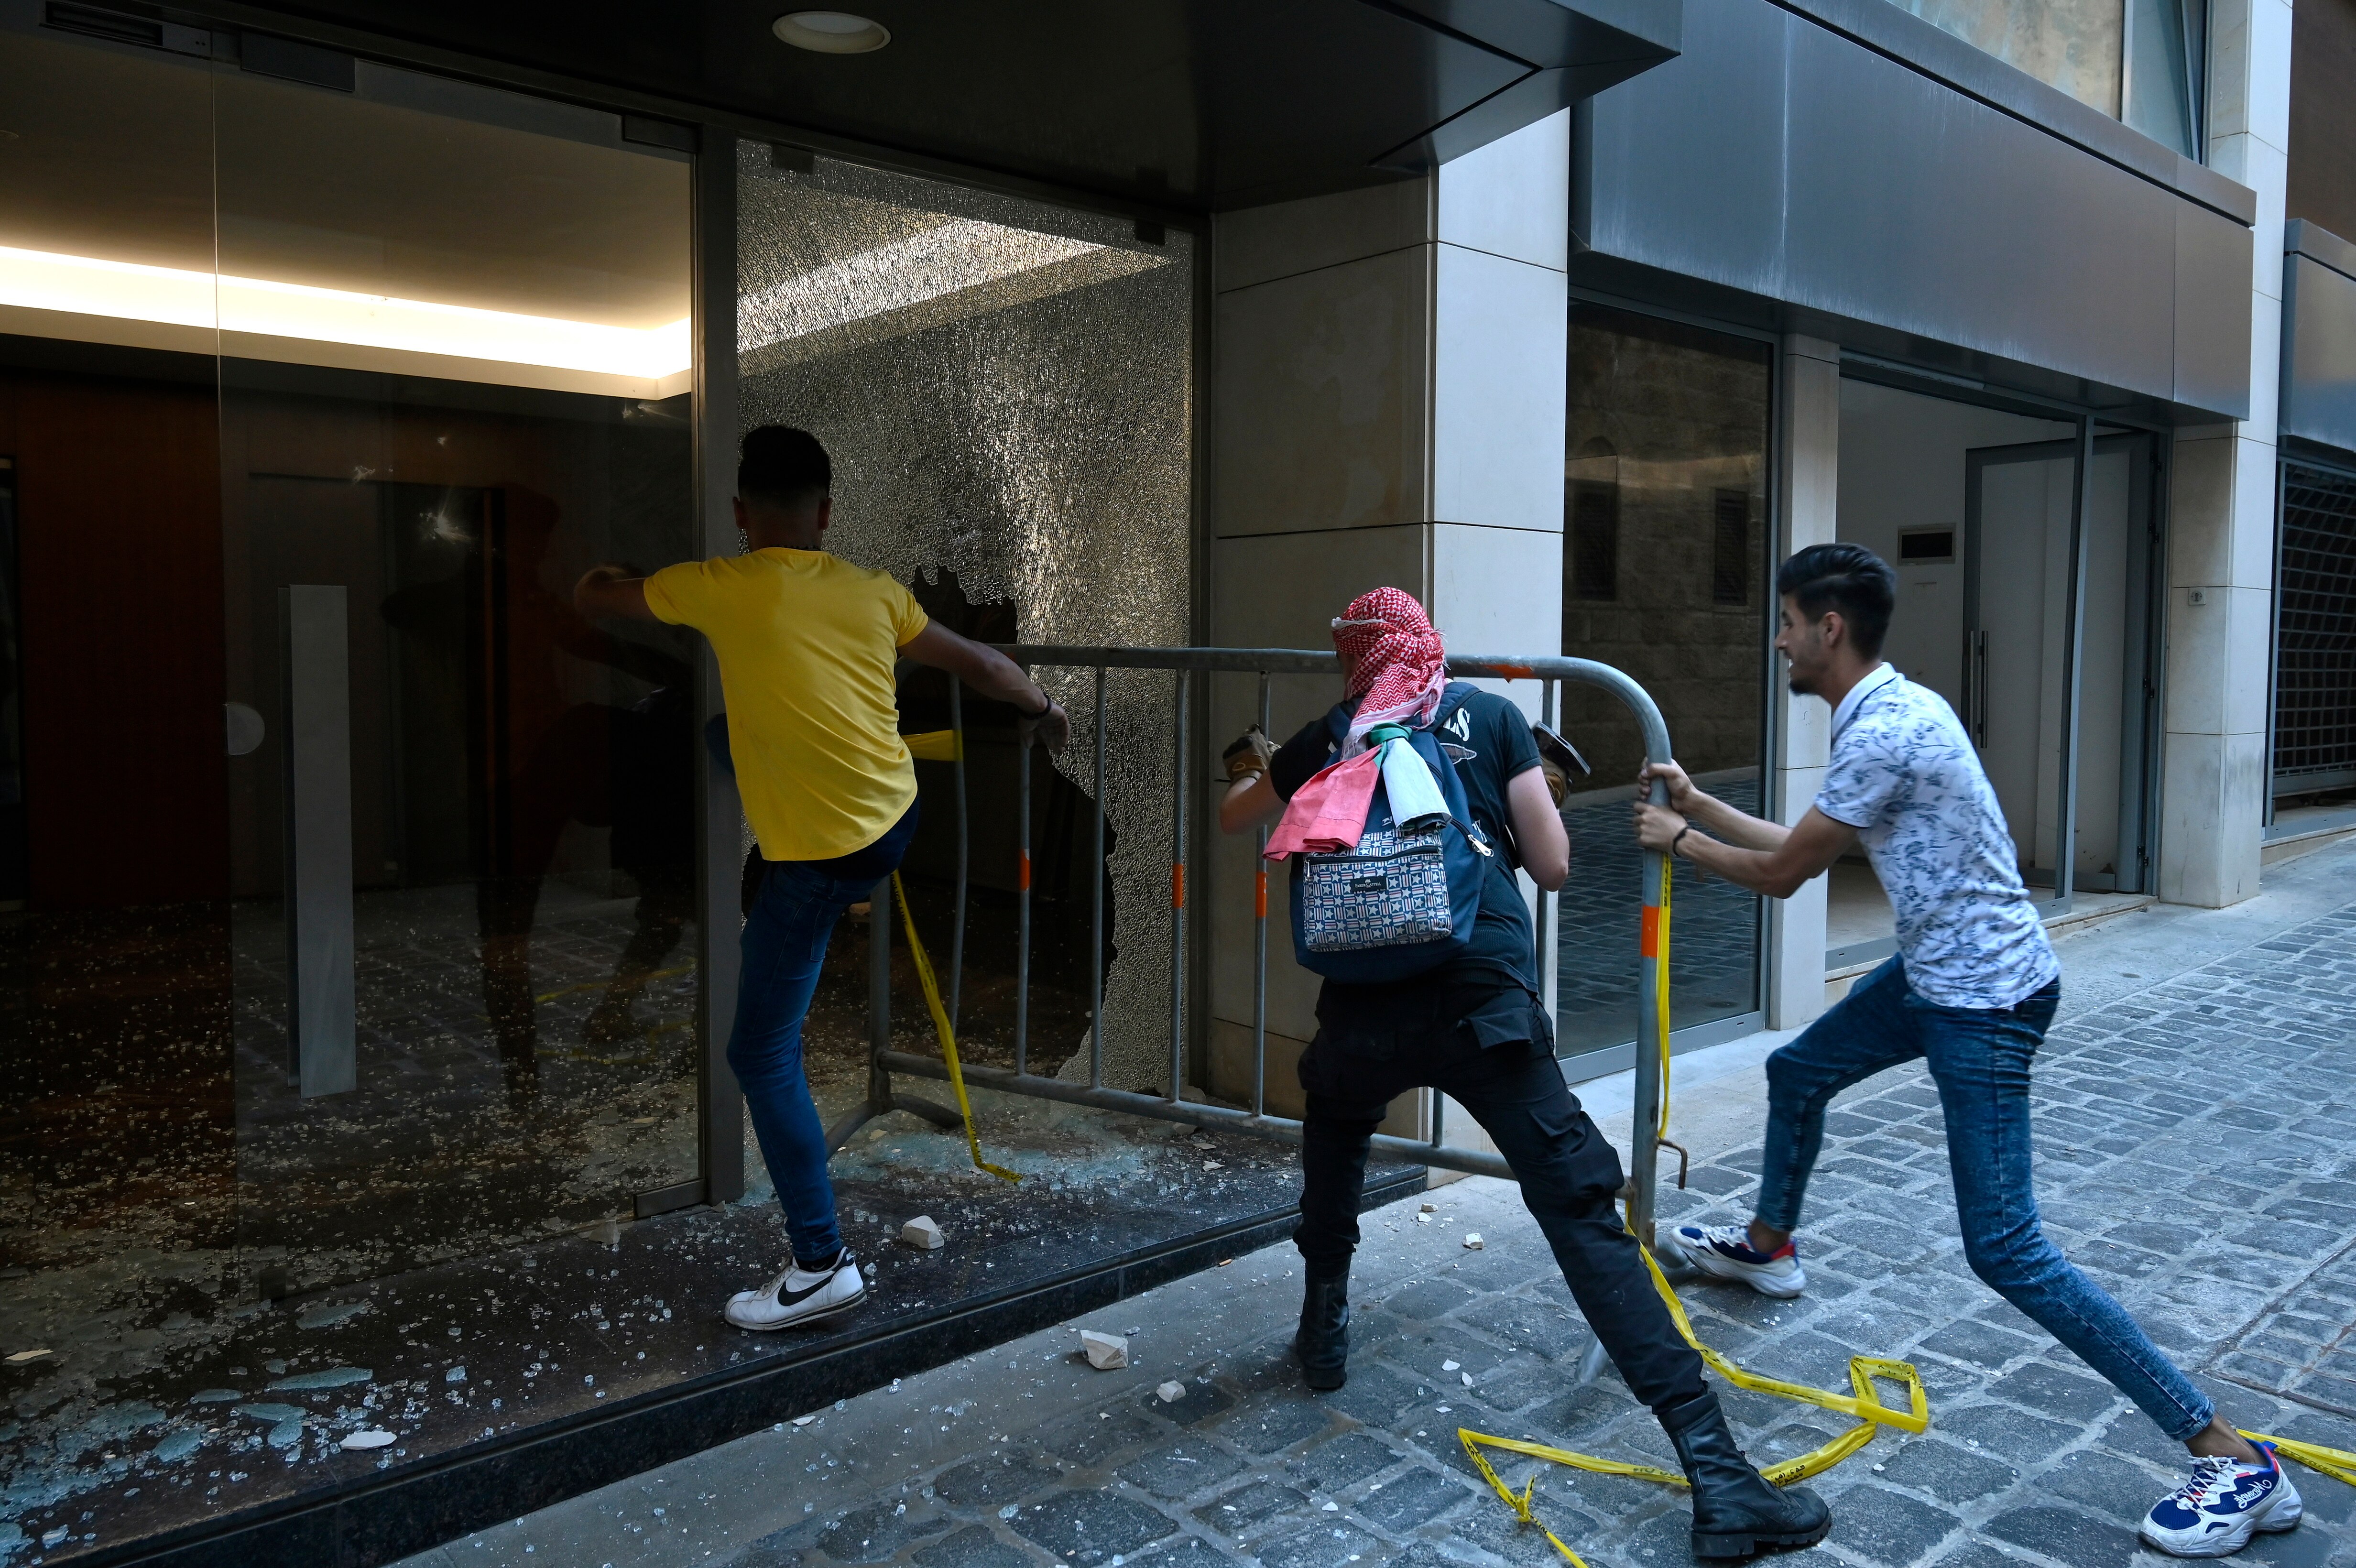 nti-government protesters using a metal barrier to smash glass panels